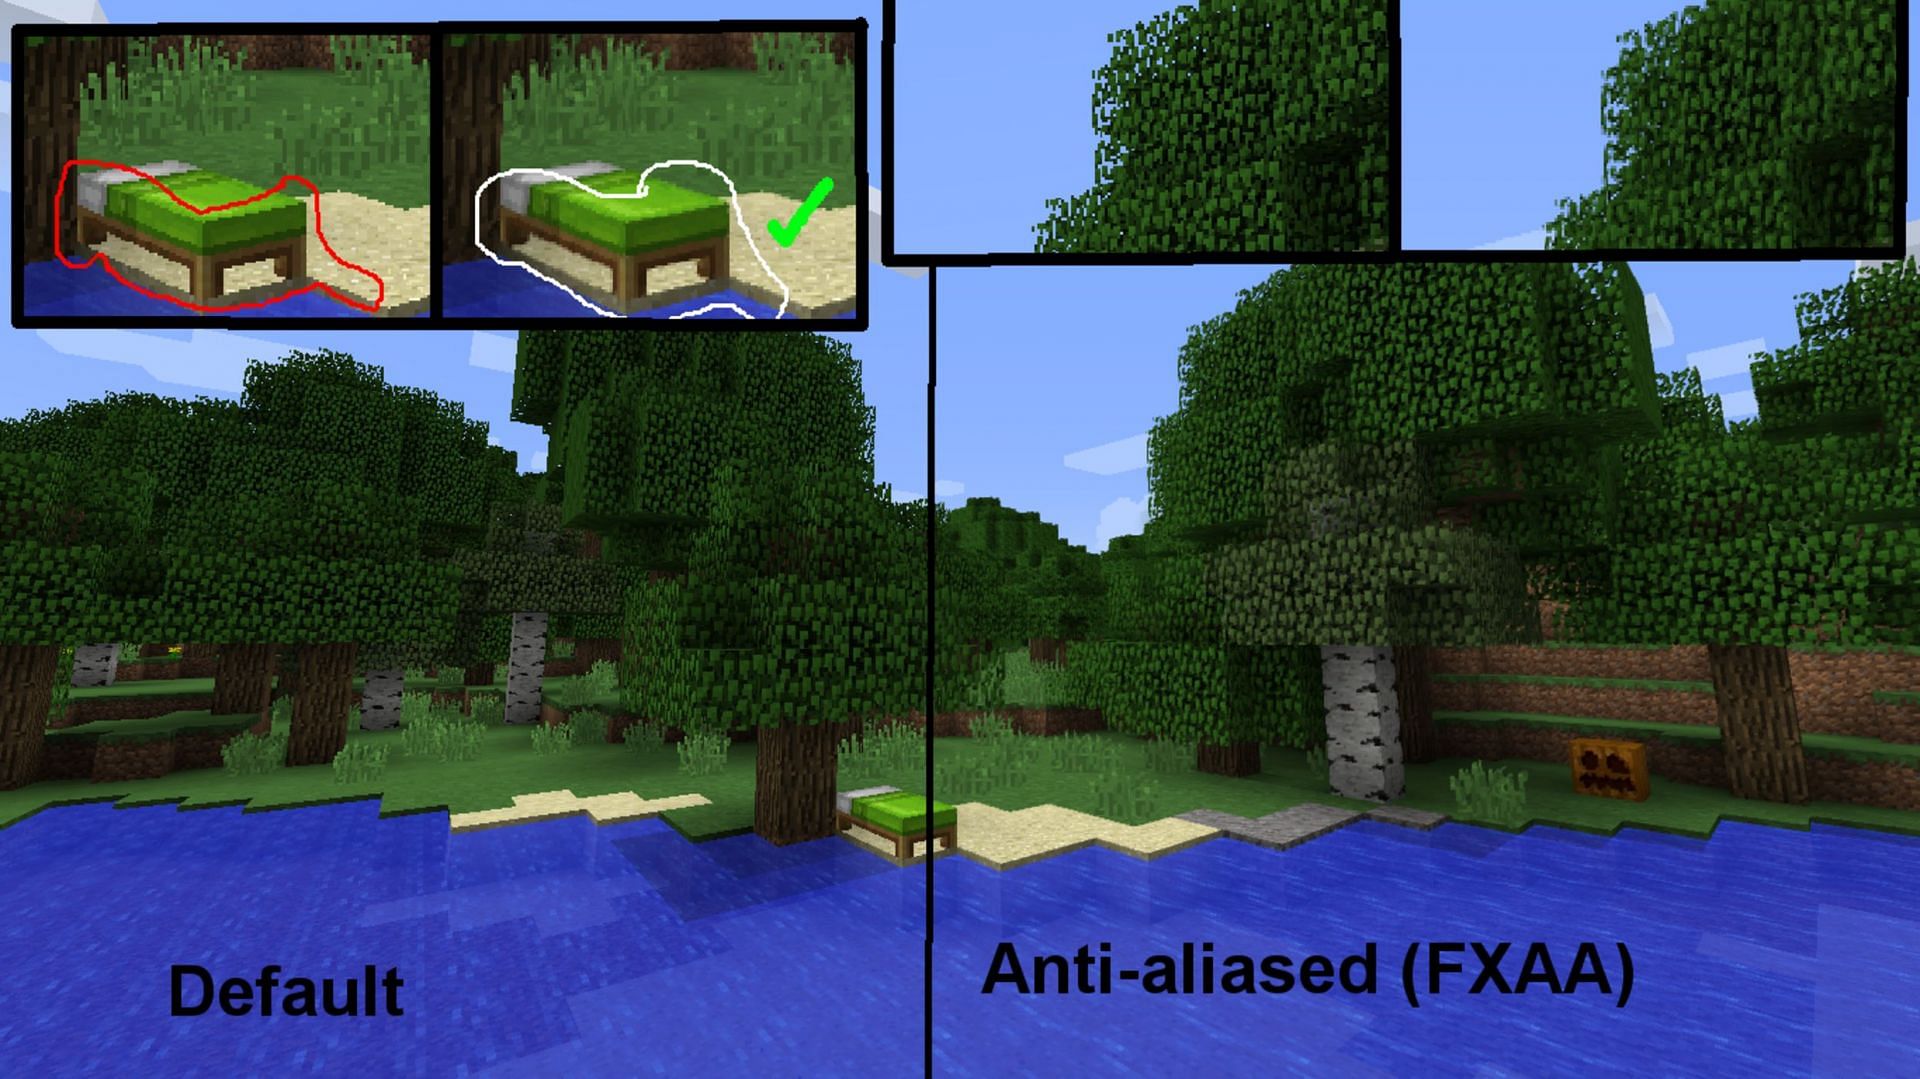 Anti-aliasing removes some undesirable graphical effects from edges (Image via u/Niknokinater/Reddit)